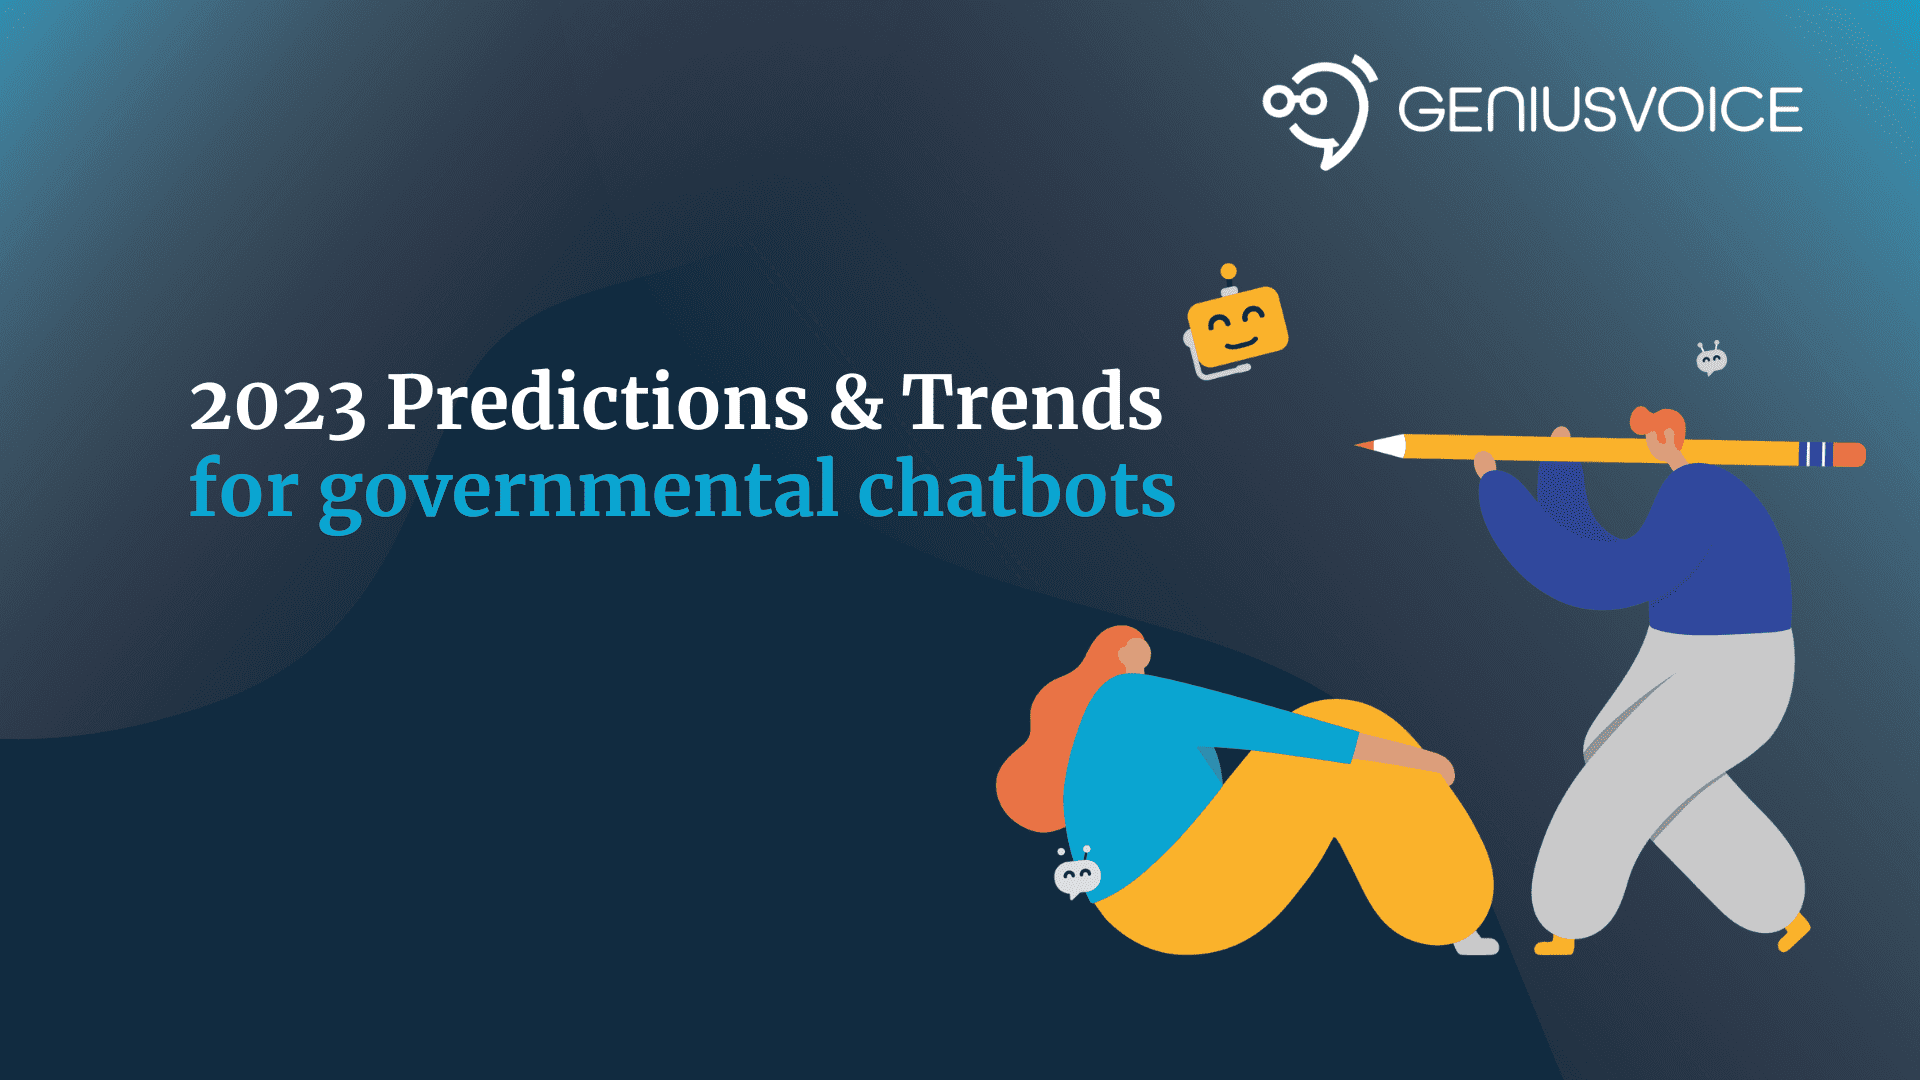 The future of chatbots in governments: Predictions and trends for 2023 and beyond